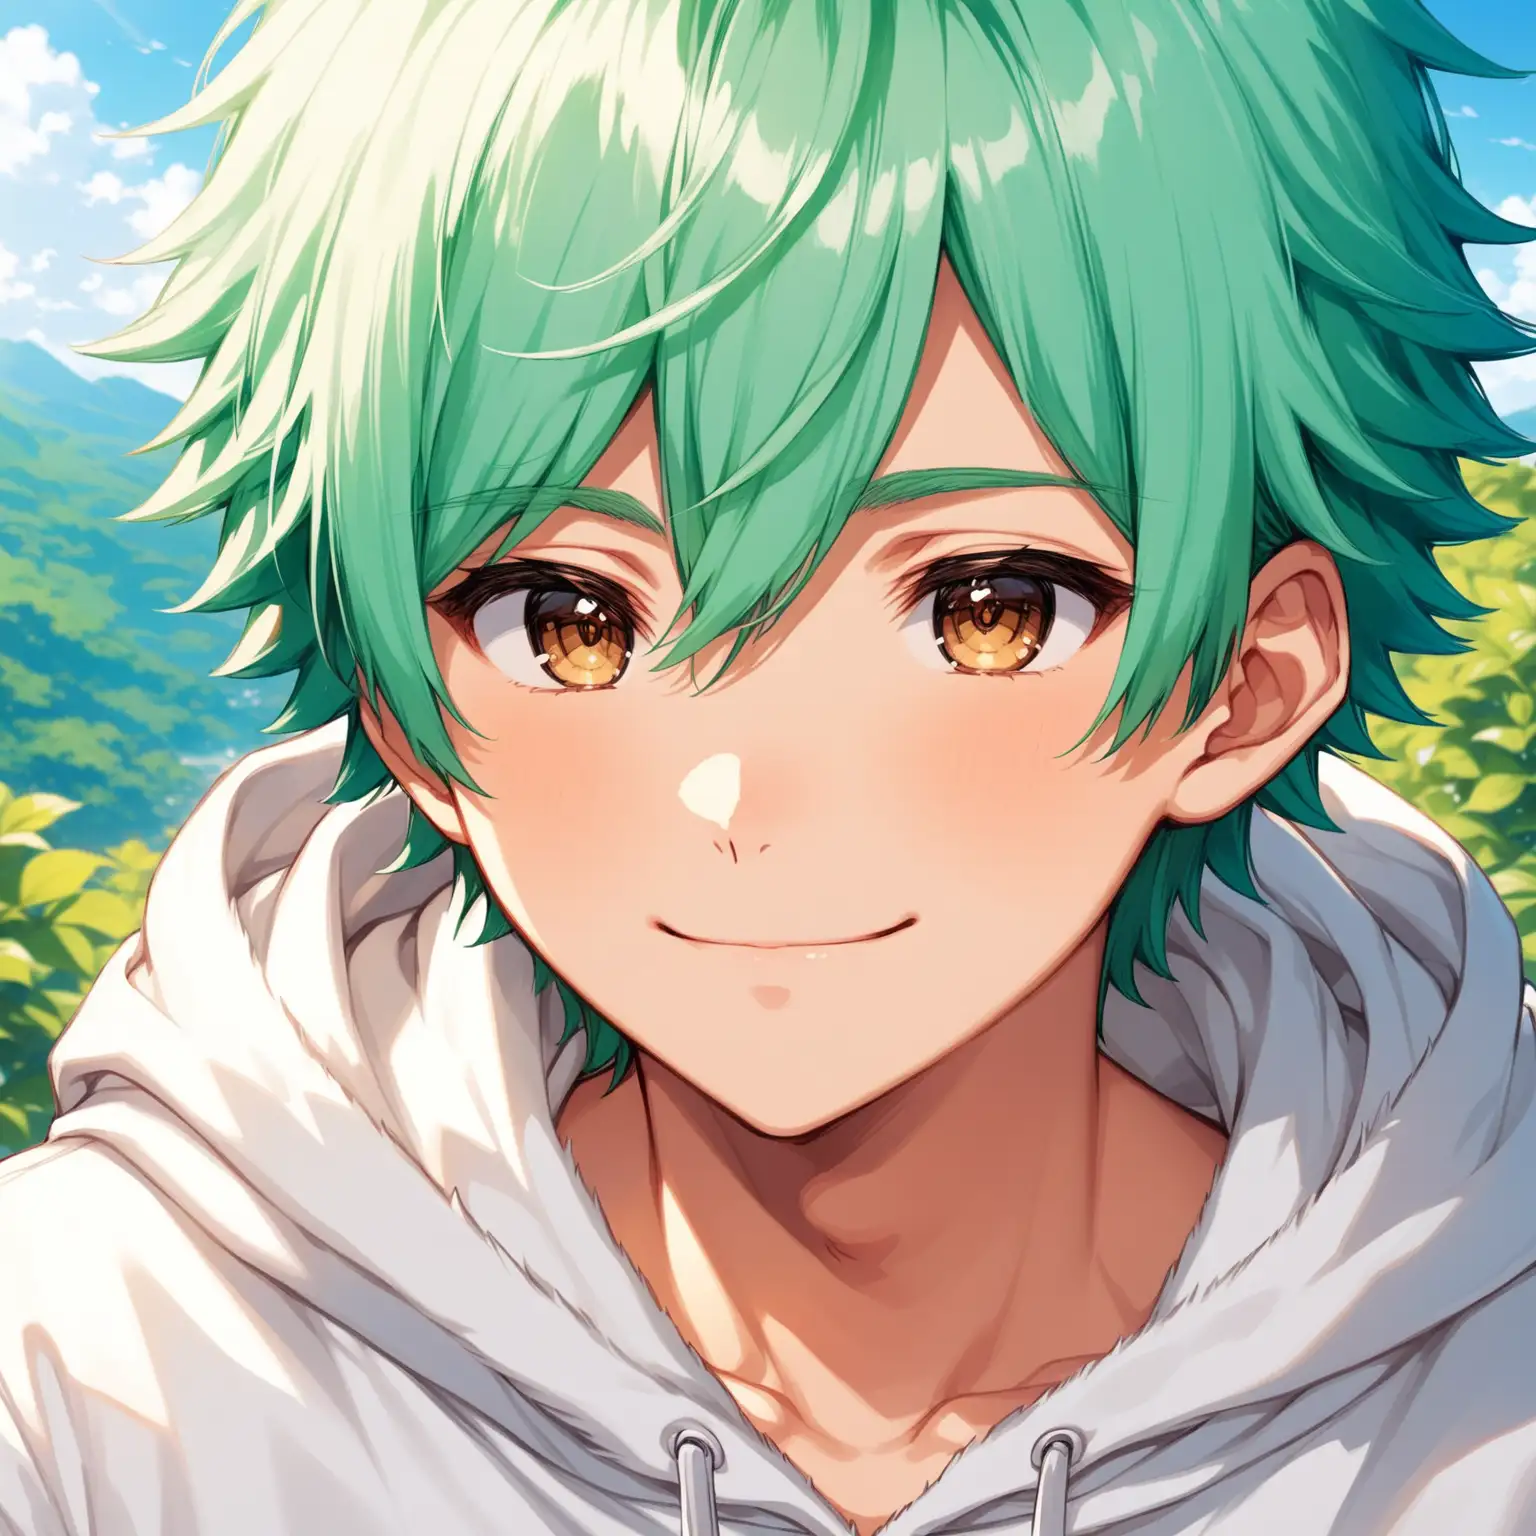 Draw a cute anime boy, high quality, close up, natural lighting, outdoors, white hoodie, fluffy mint hair, brown eyes, closed-lip smile